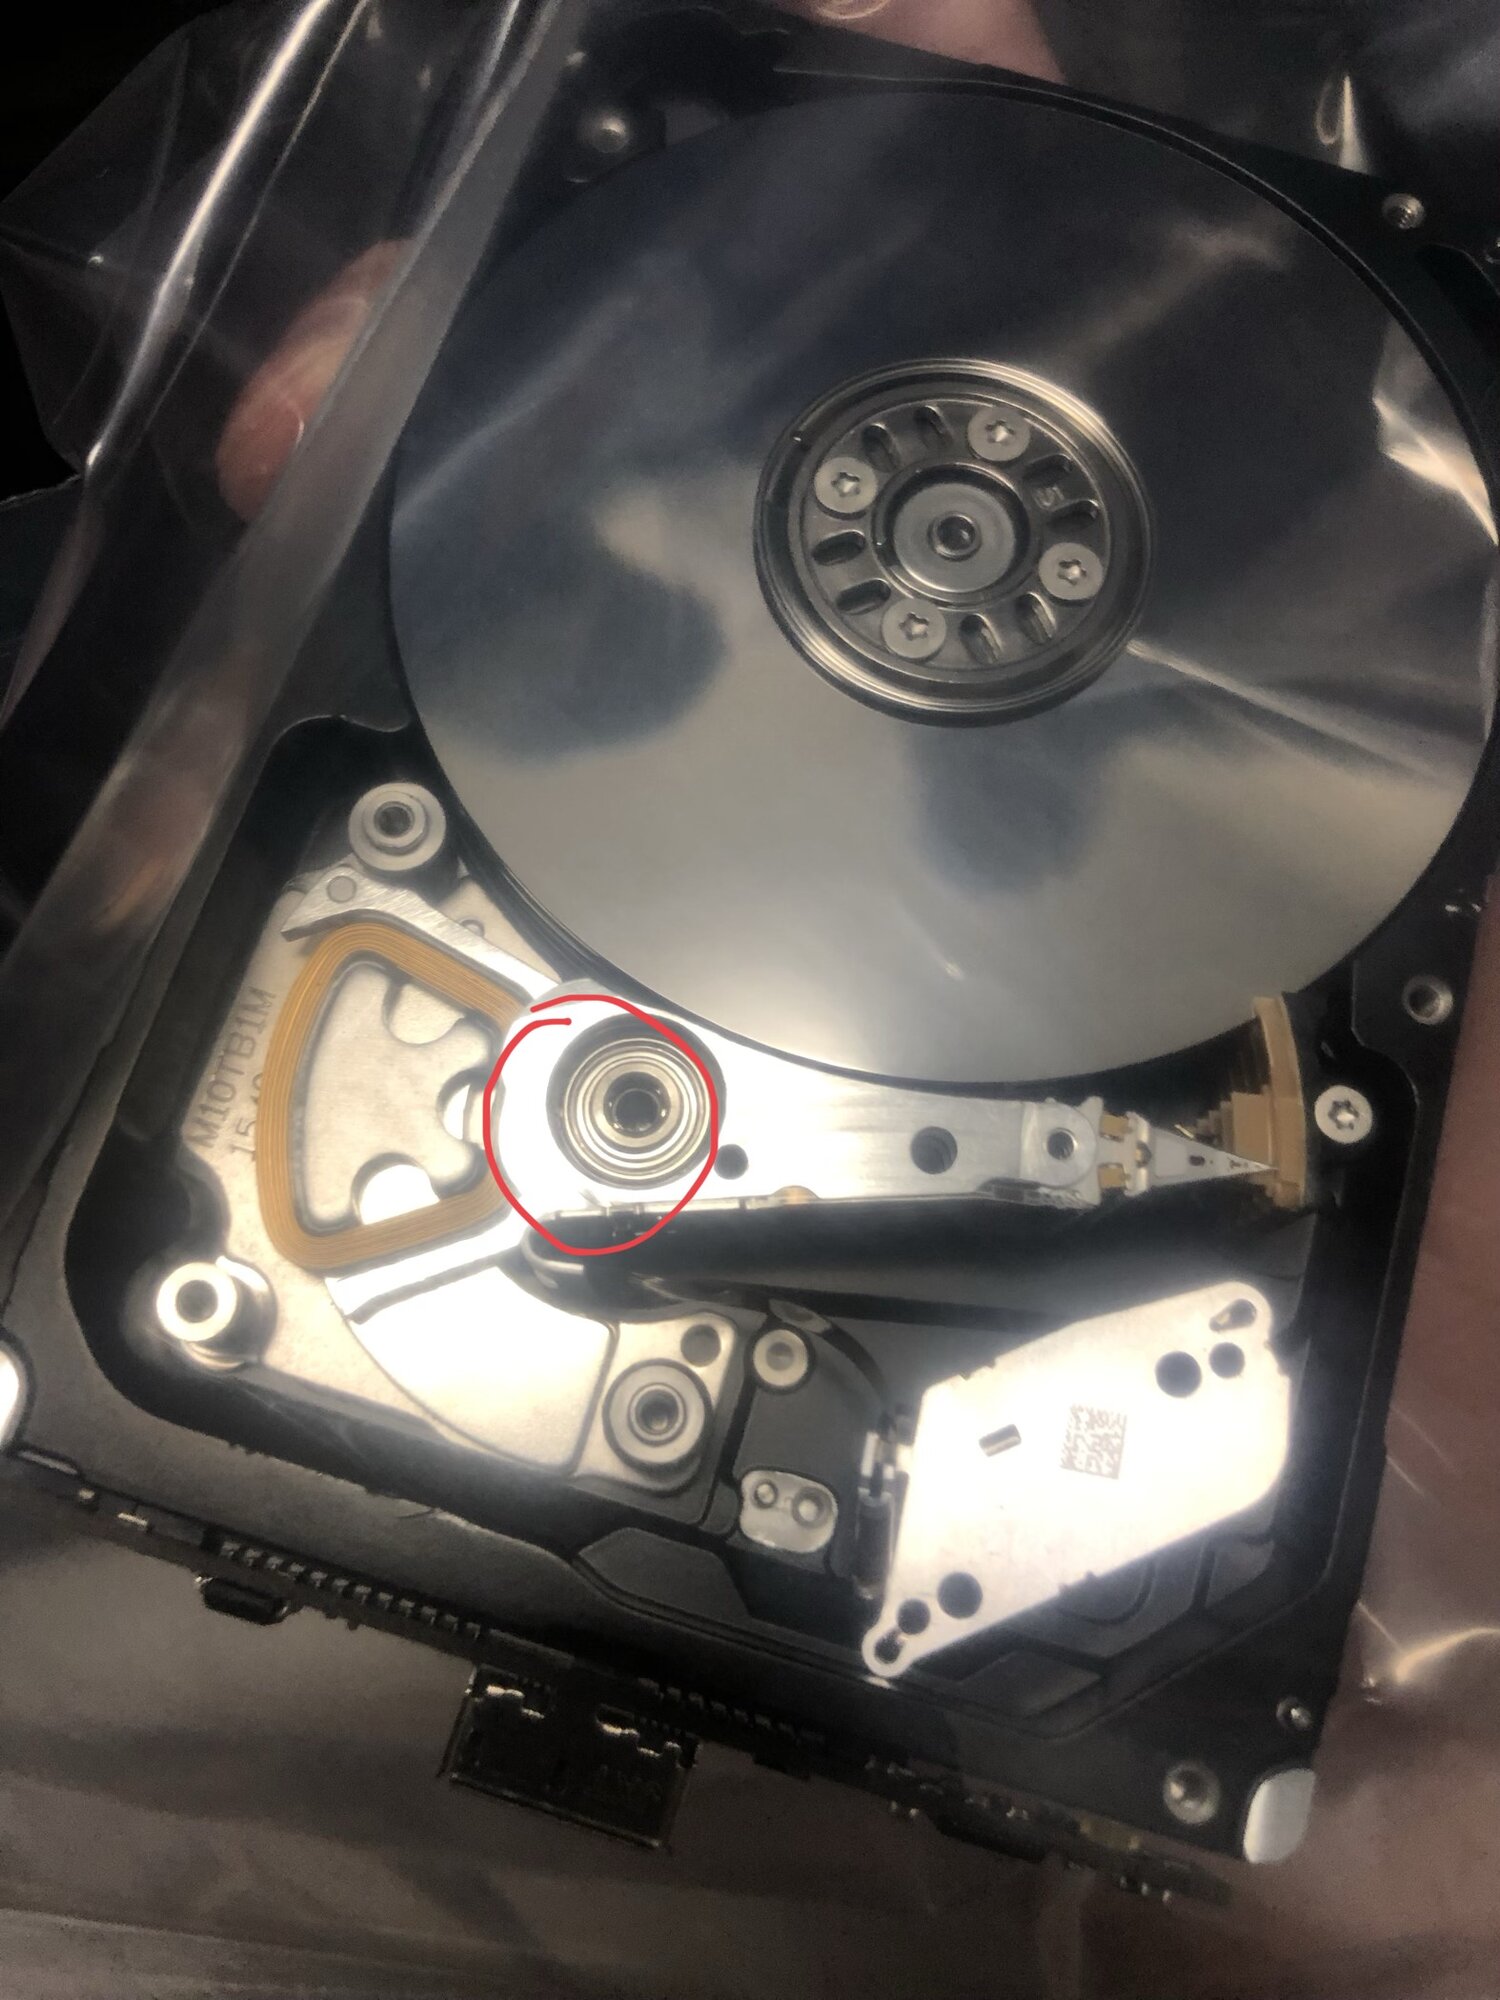 seagate hdd seatools wont work